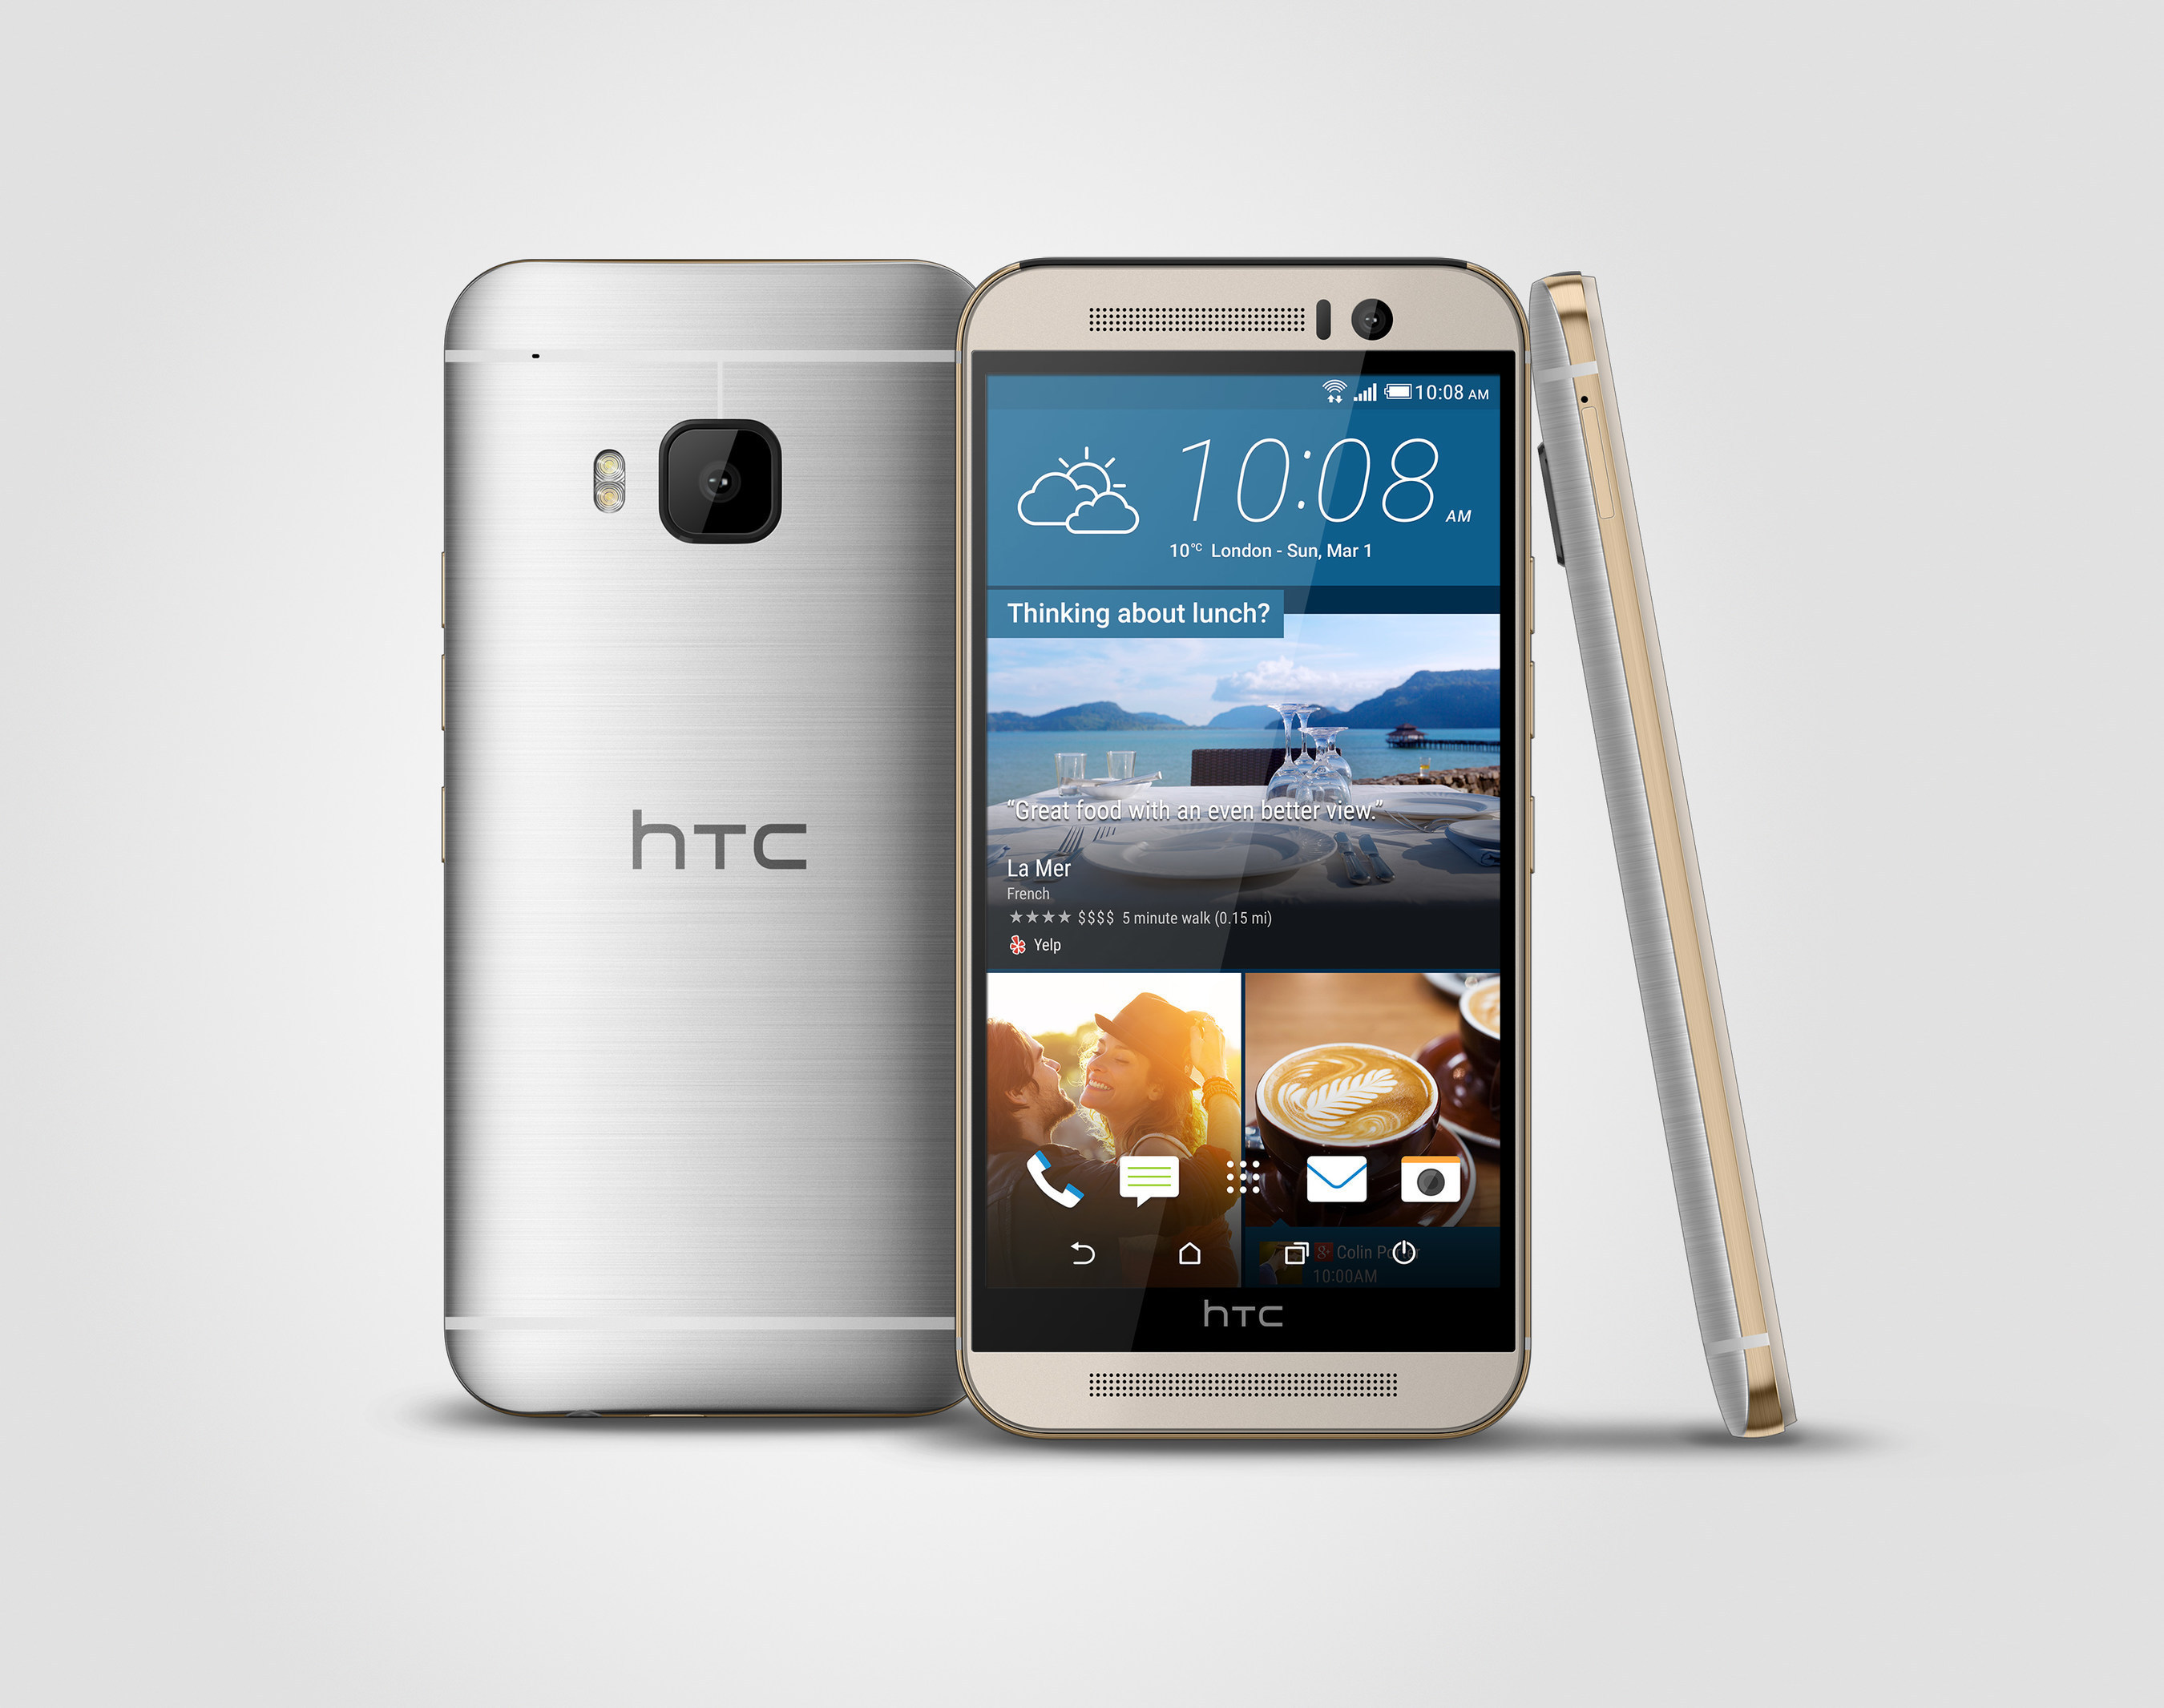 The new HTC One has a stunning dual-finish metal body, a 20MP camera, intuitive apps that anticipate your needs, front-facing BoomSound(TM) speakers with Dolby Audio and a 5-inch full HD screen. The HTC One M9 made its debut at Mobile World Congress on March 1, 2015 in Barcelona, along with other HTC innovative announcements.